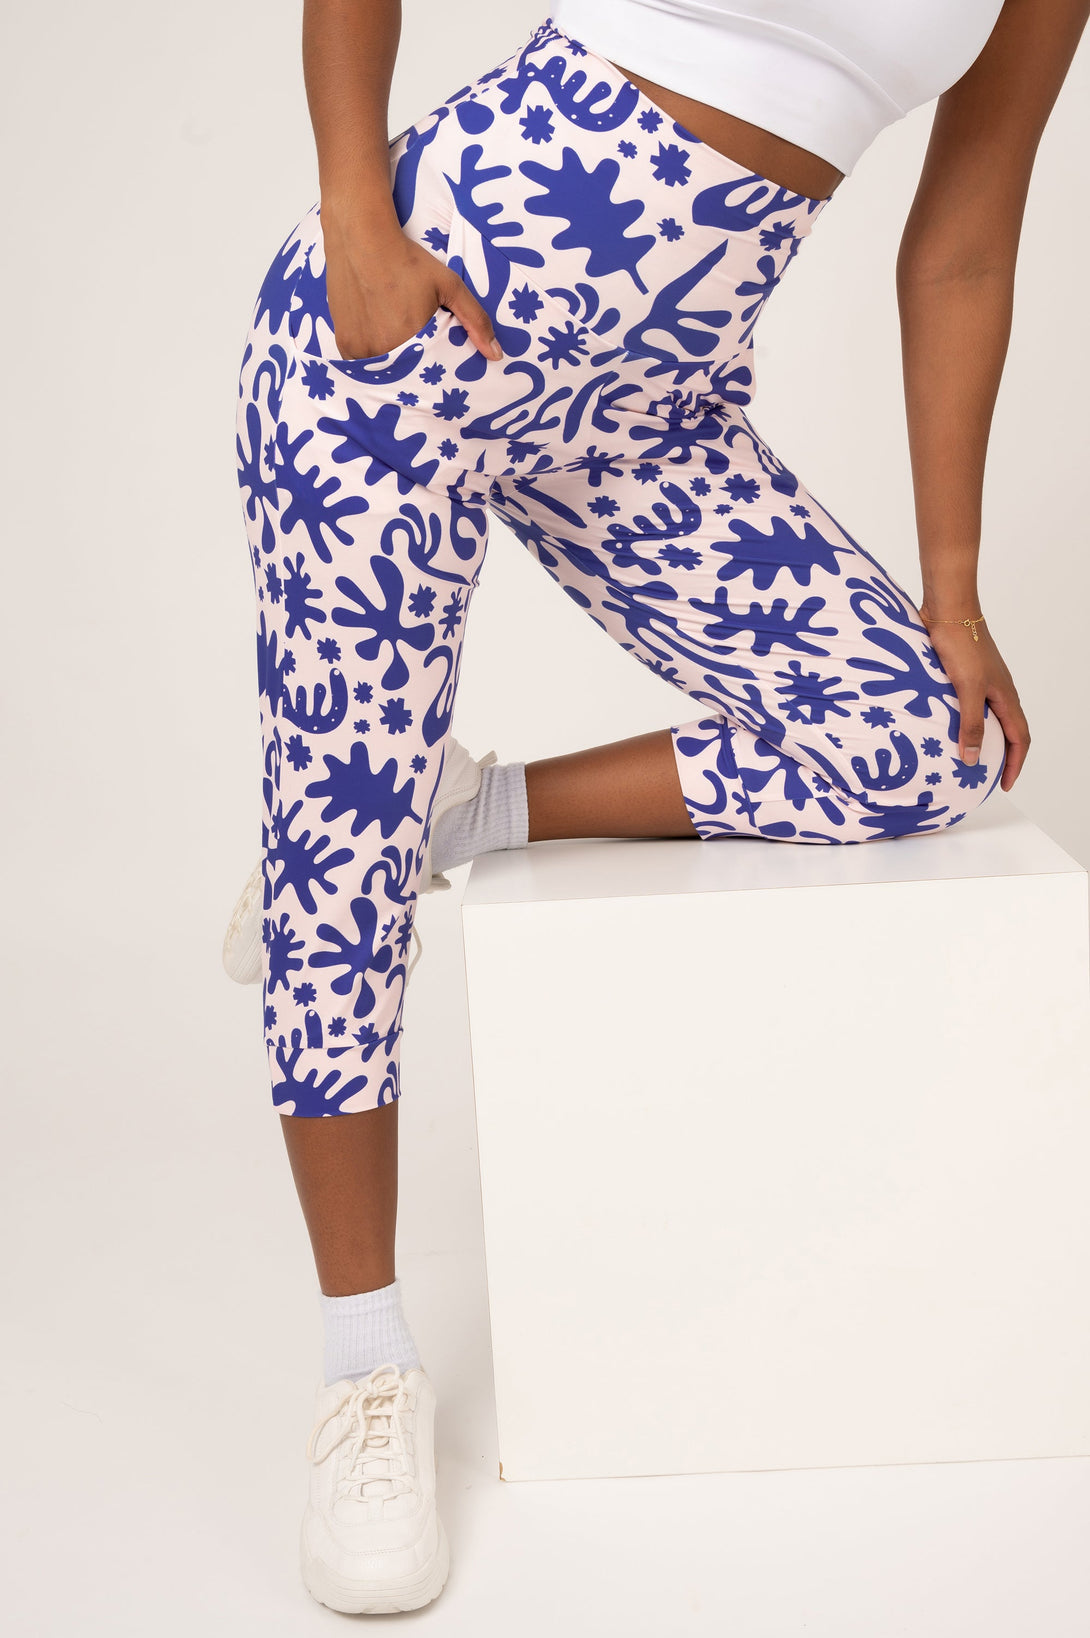 Whatever Soft To Touch - Jogger Capris W/ Pockets-Activewear-Exoticathletica